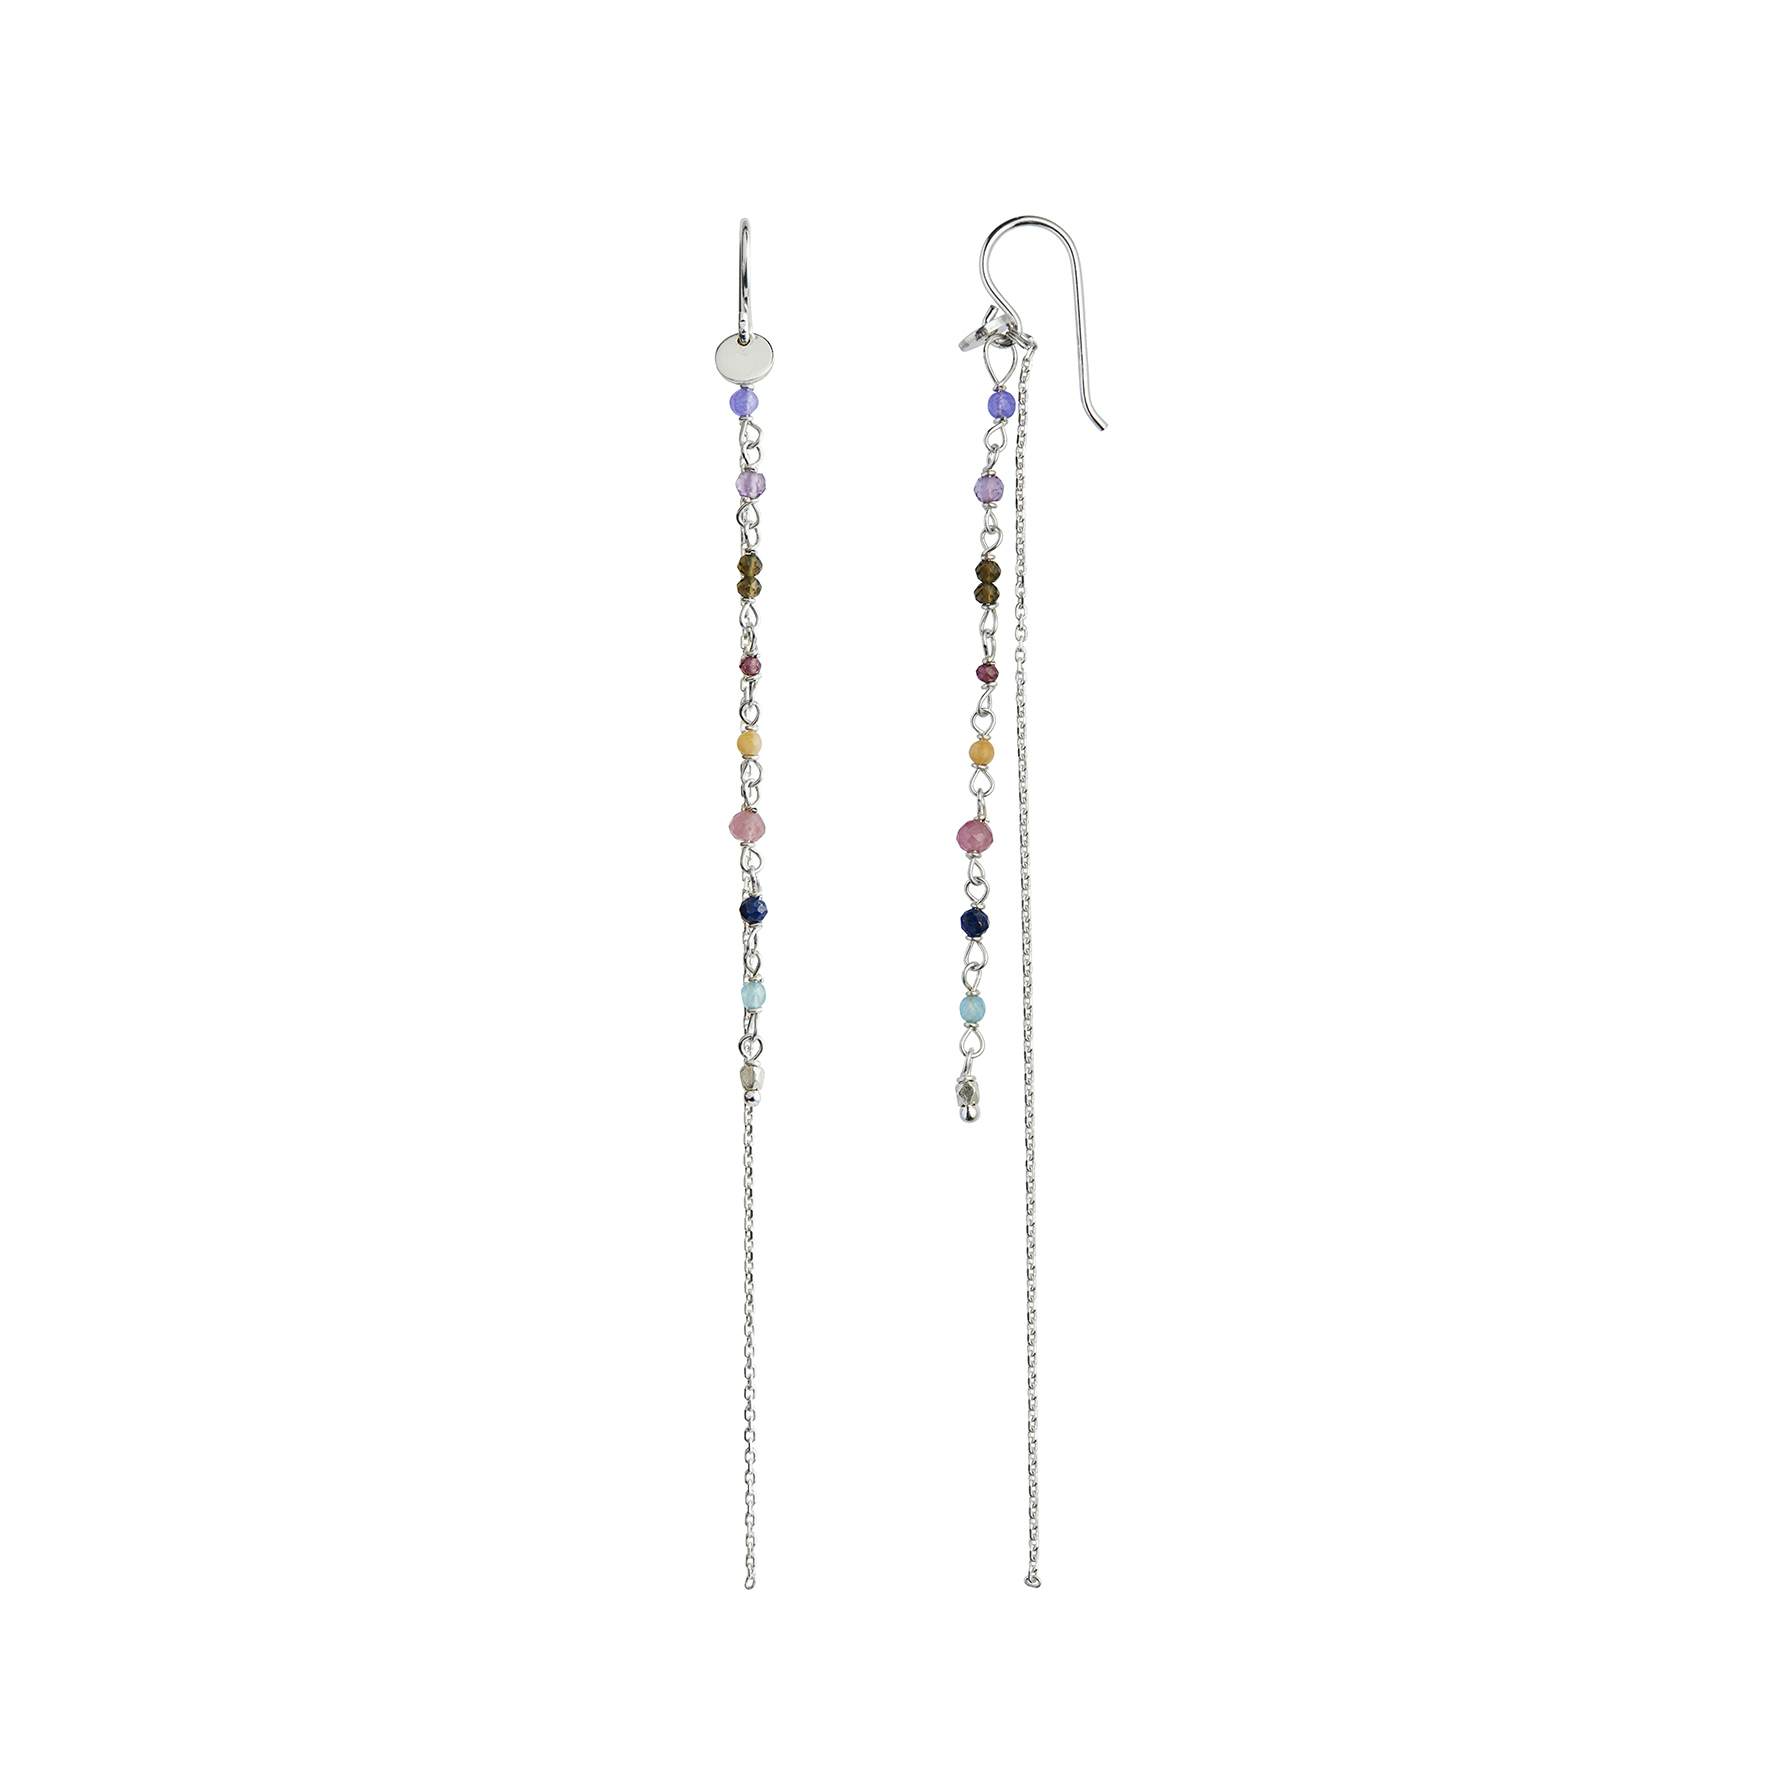 Petit Gemstones Earring With Long Chain - Berry Mix von STINE A Jewelry in Silber Sterling 925